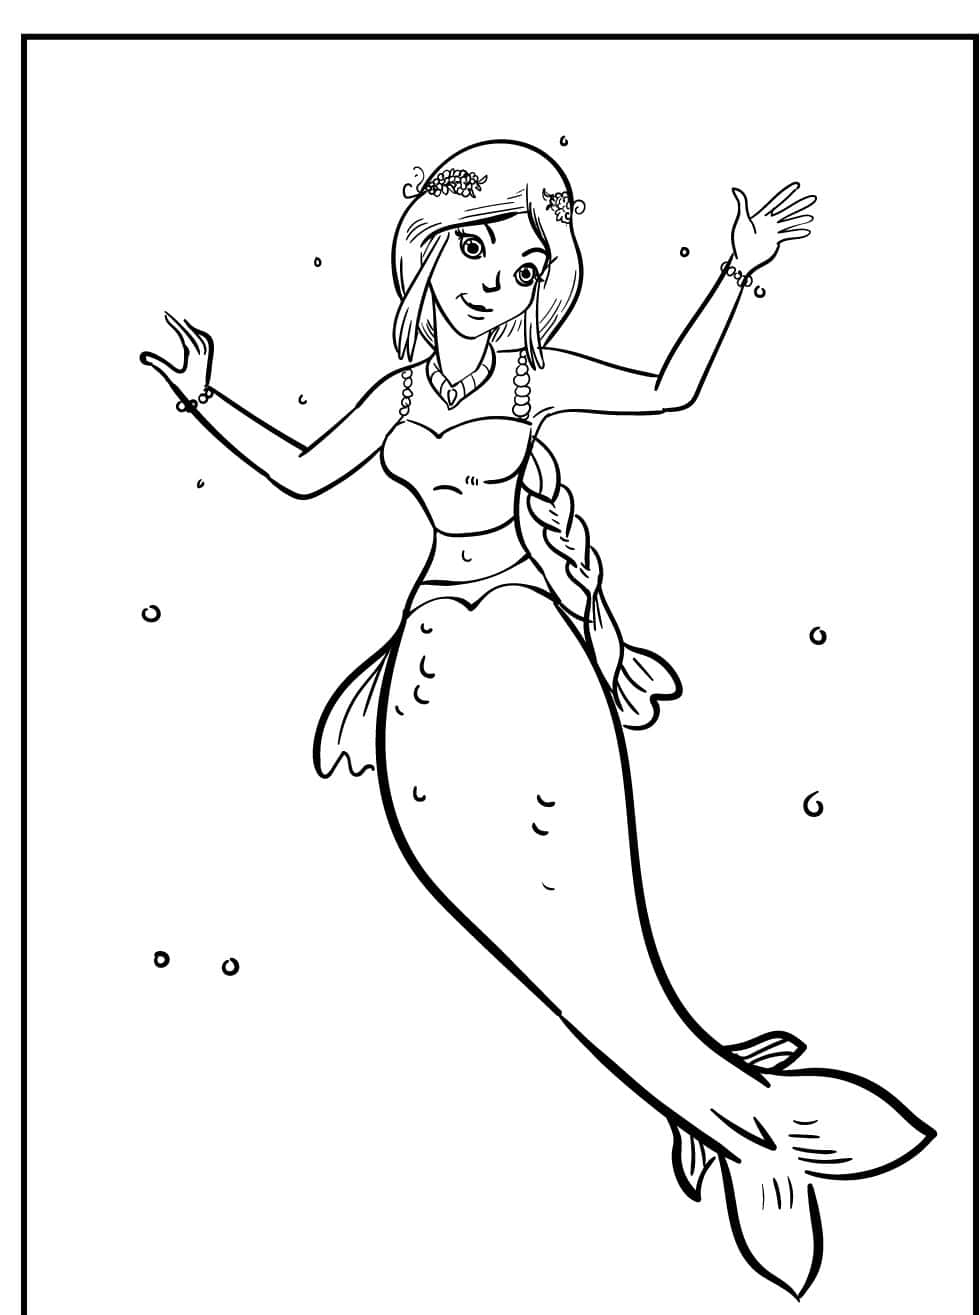 Dive into a world of creativity with this beautiful mermaid coloring page!